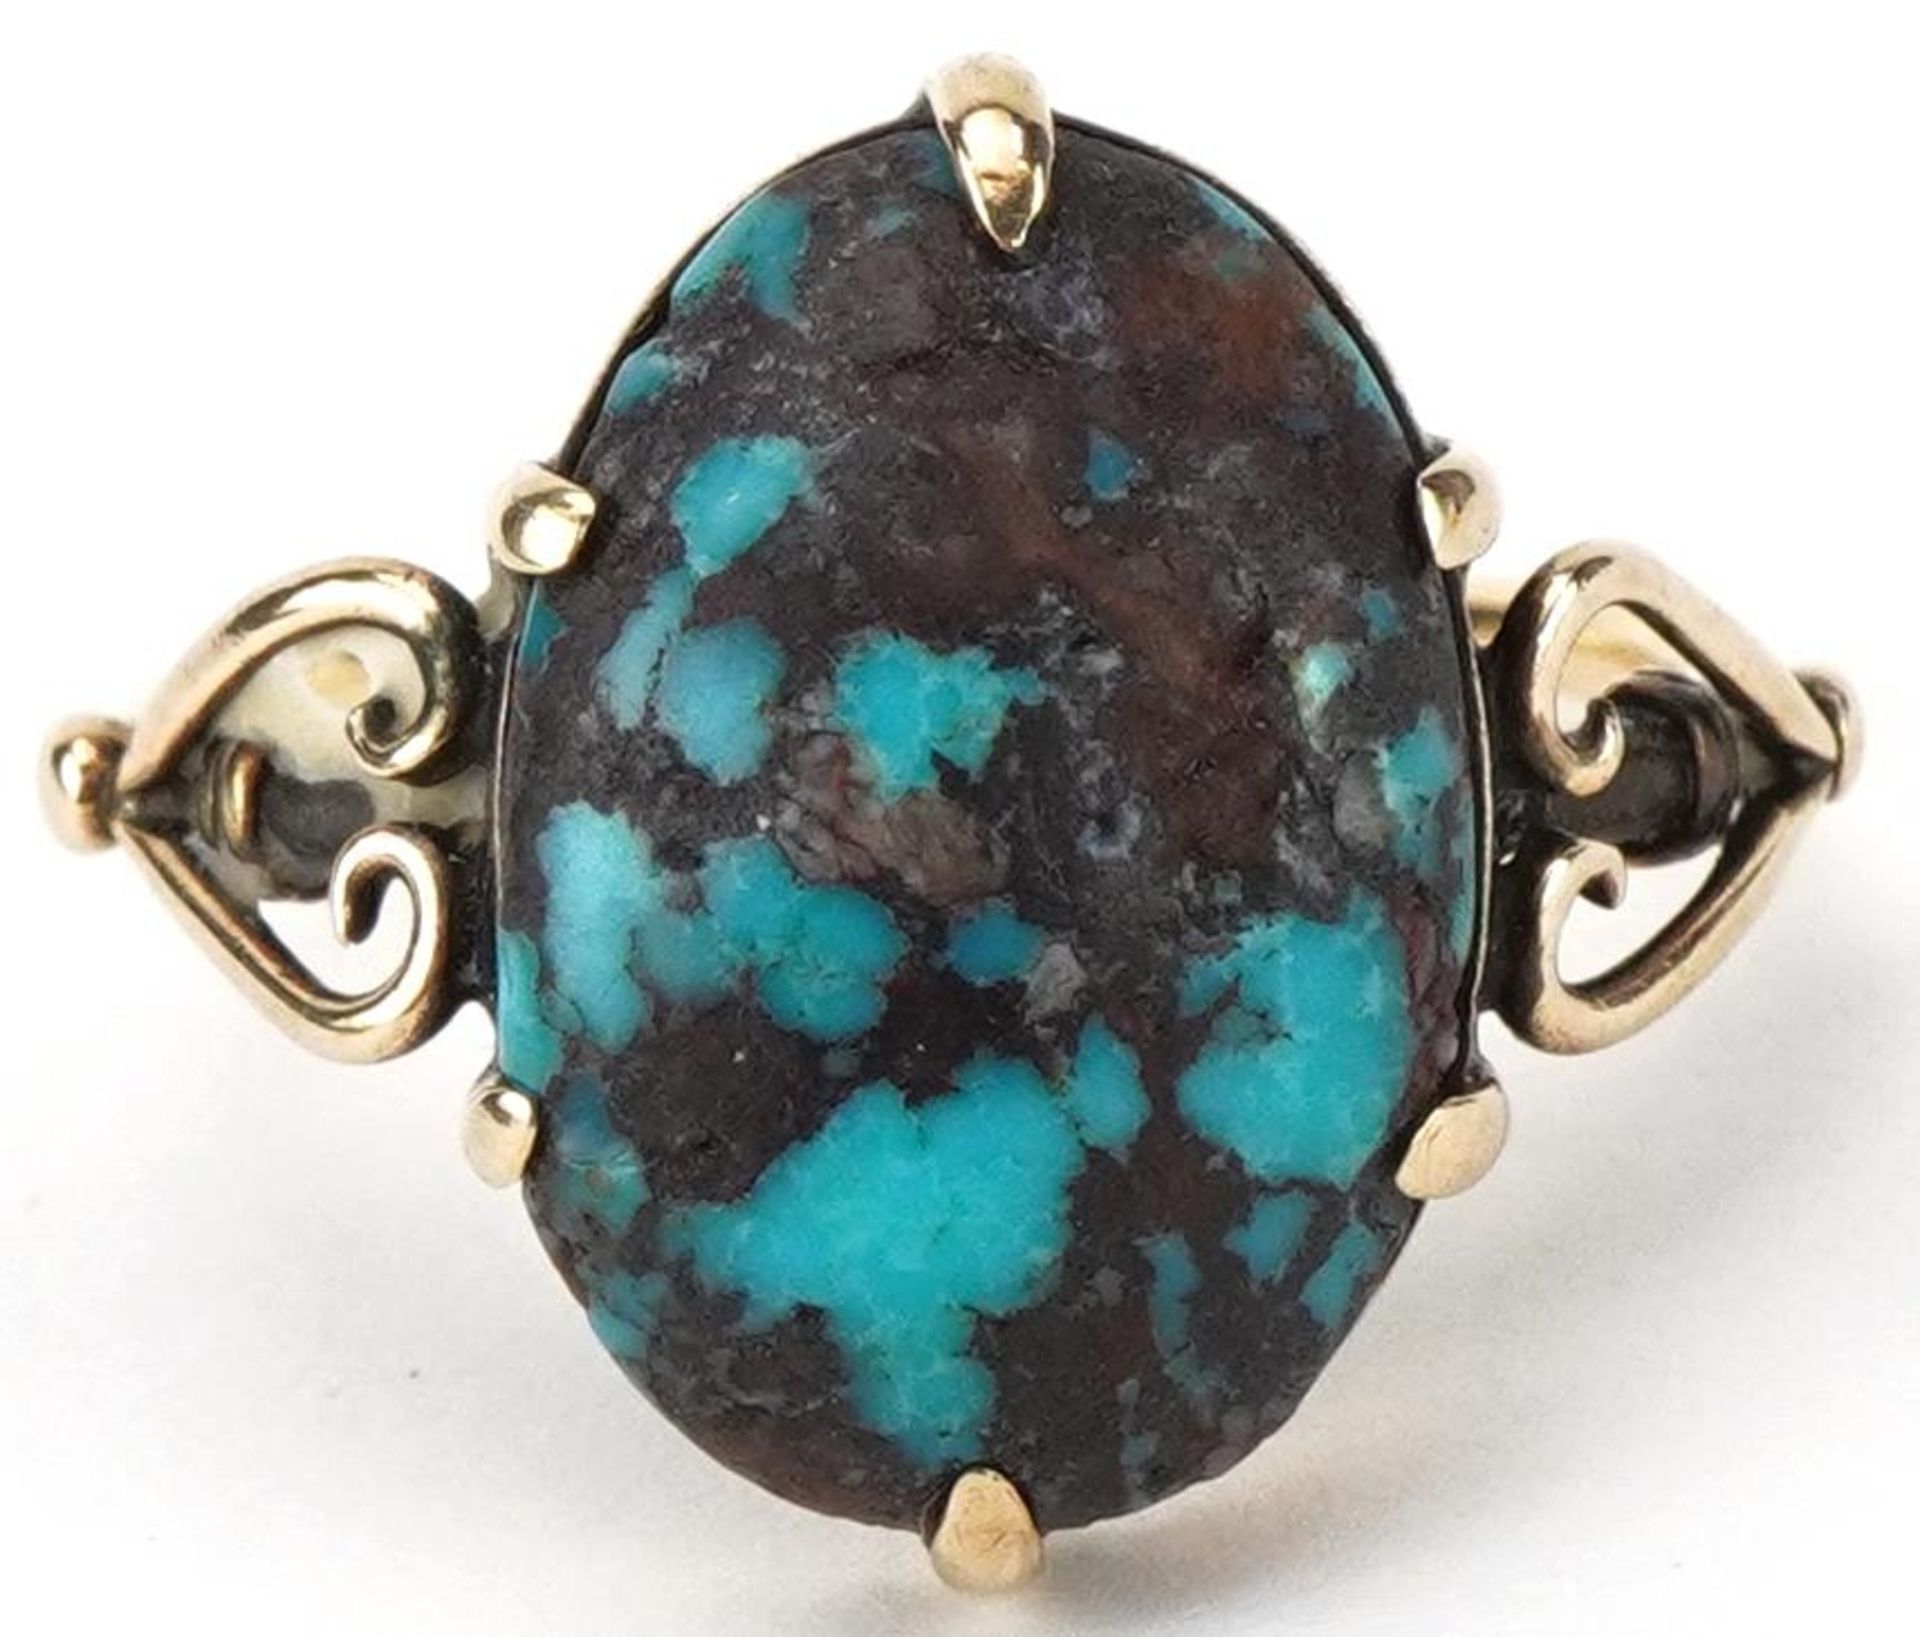 Antique unmarked gold cabochon matrix turquoise ring with love heart shoulders, tests as 15ct